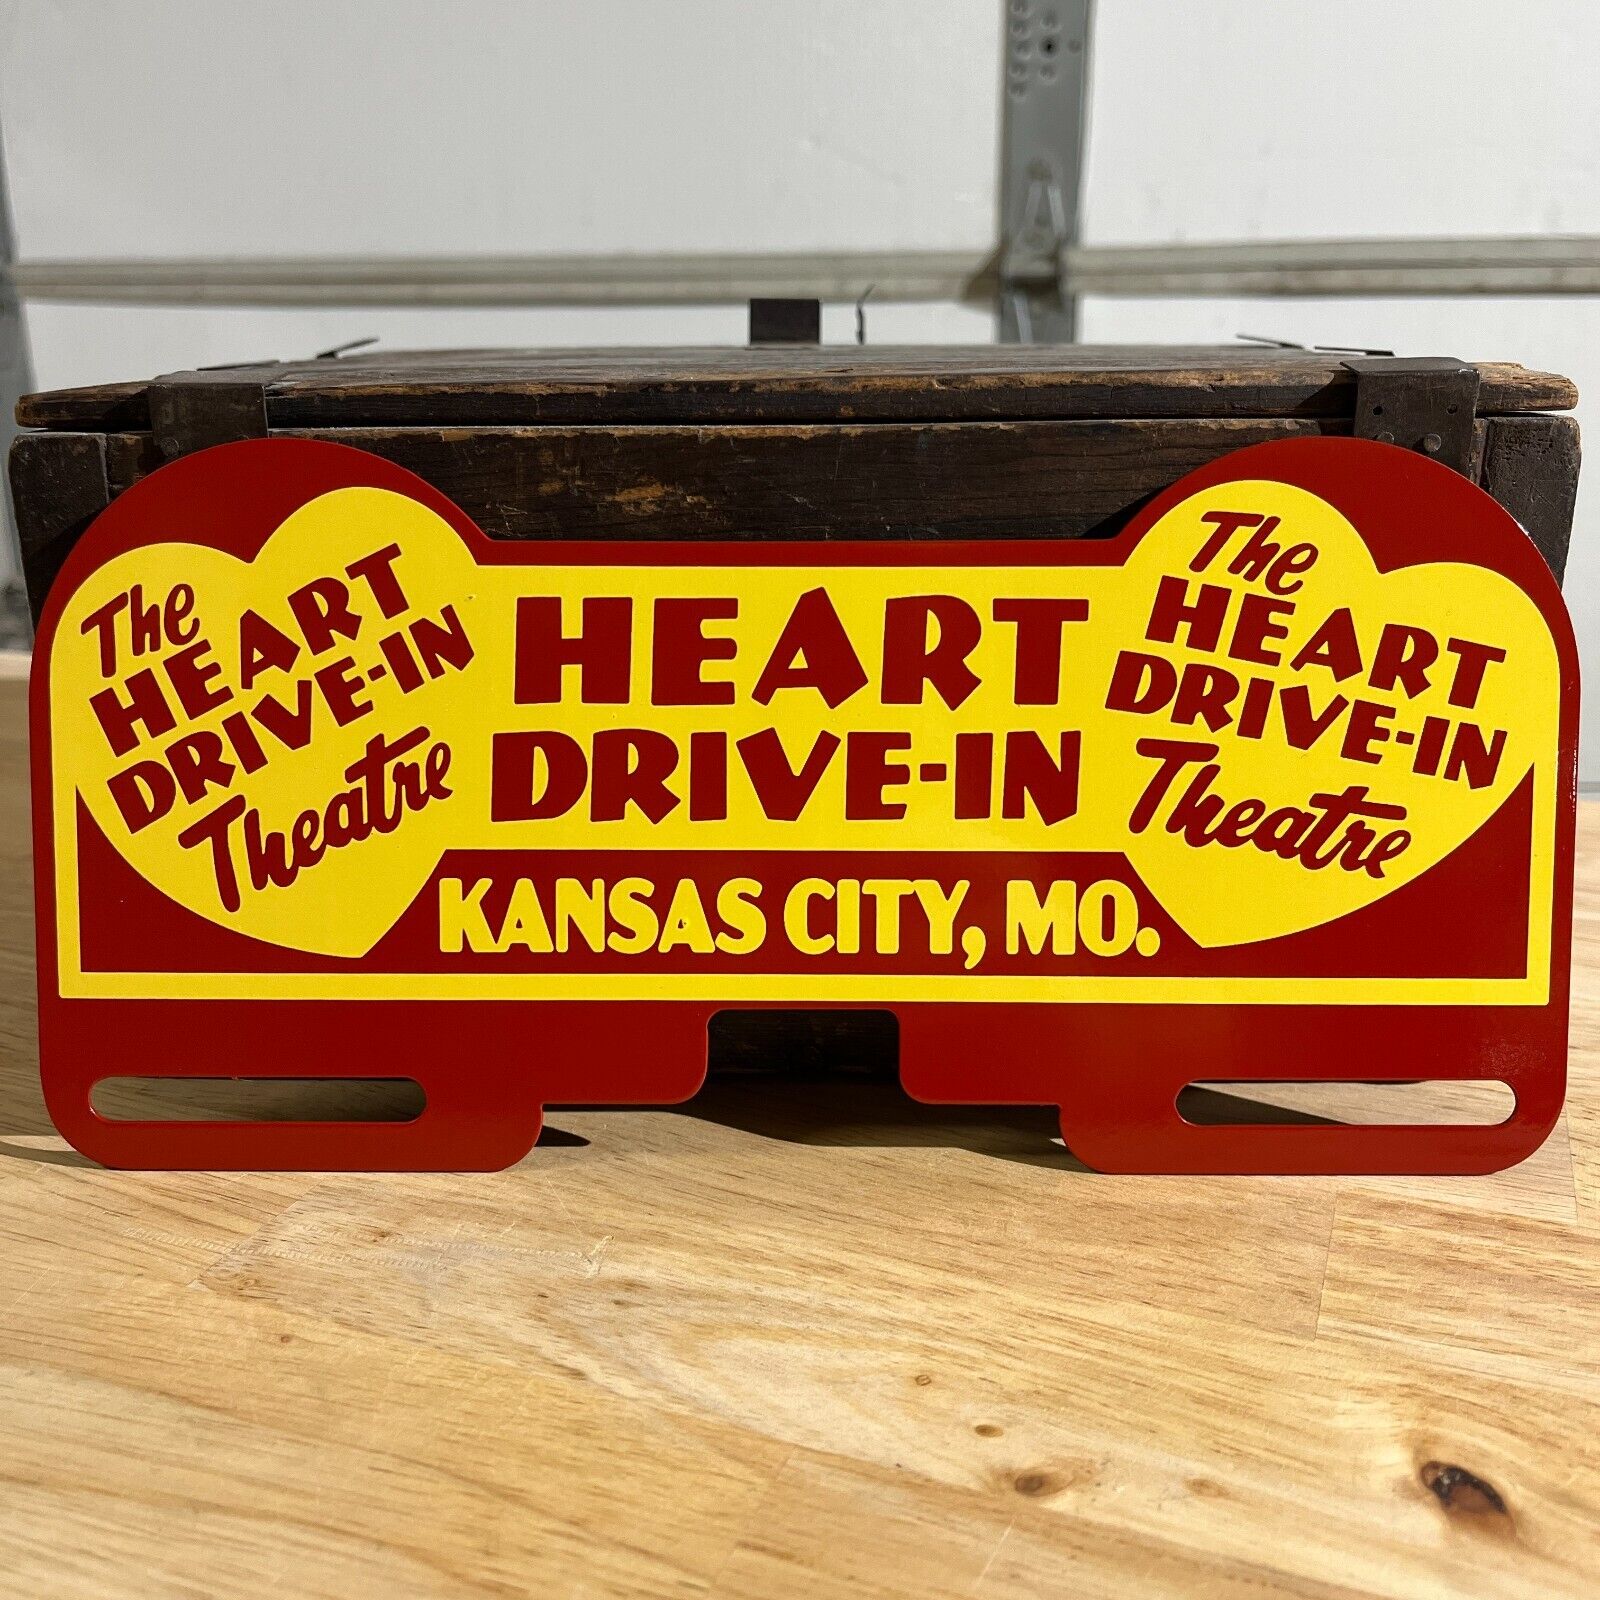 The Heart Drive In Theatre Kansas City MO. Metal License Plate Topper Sign